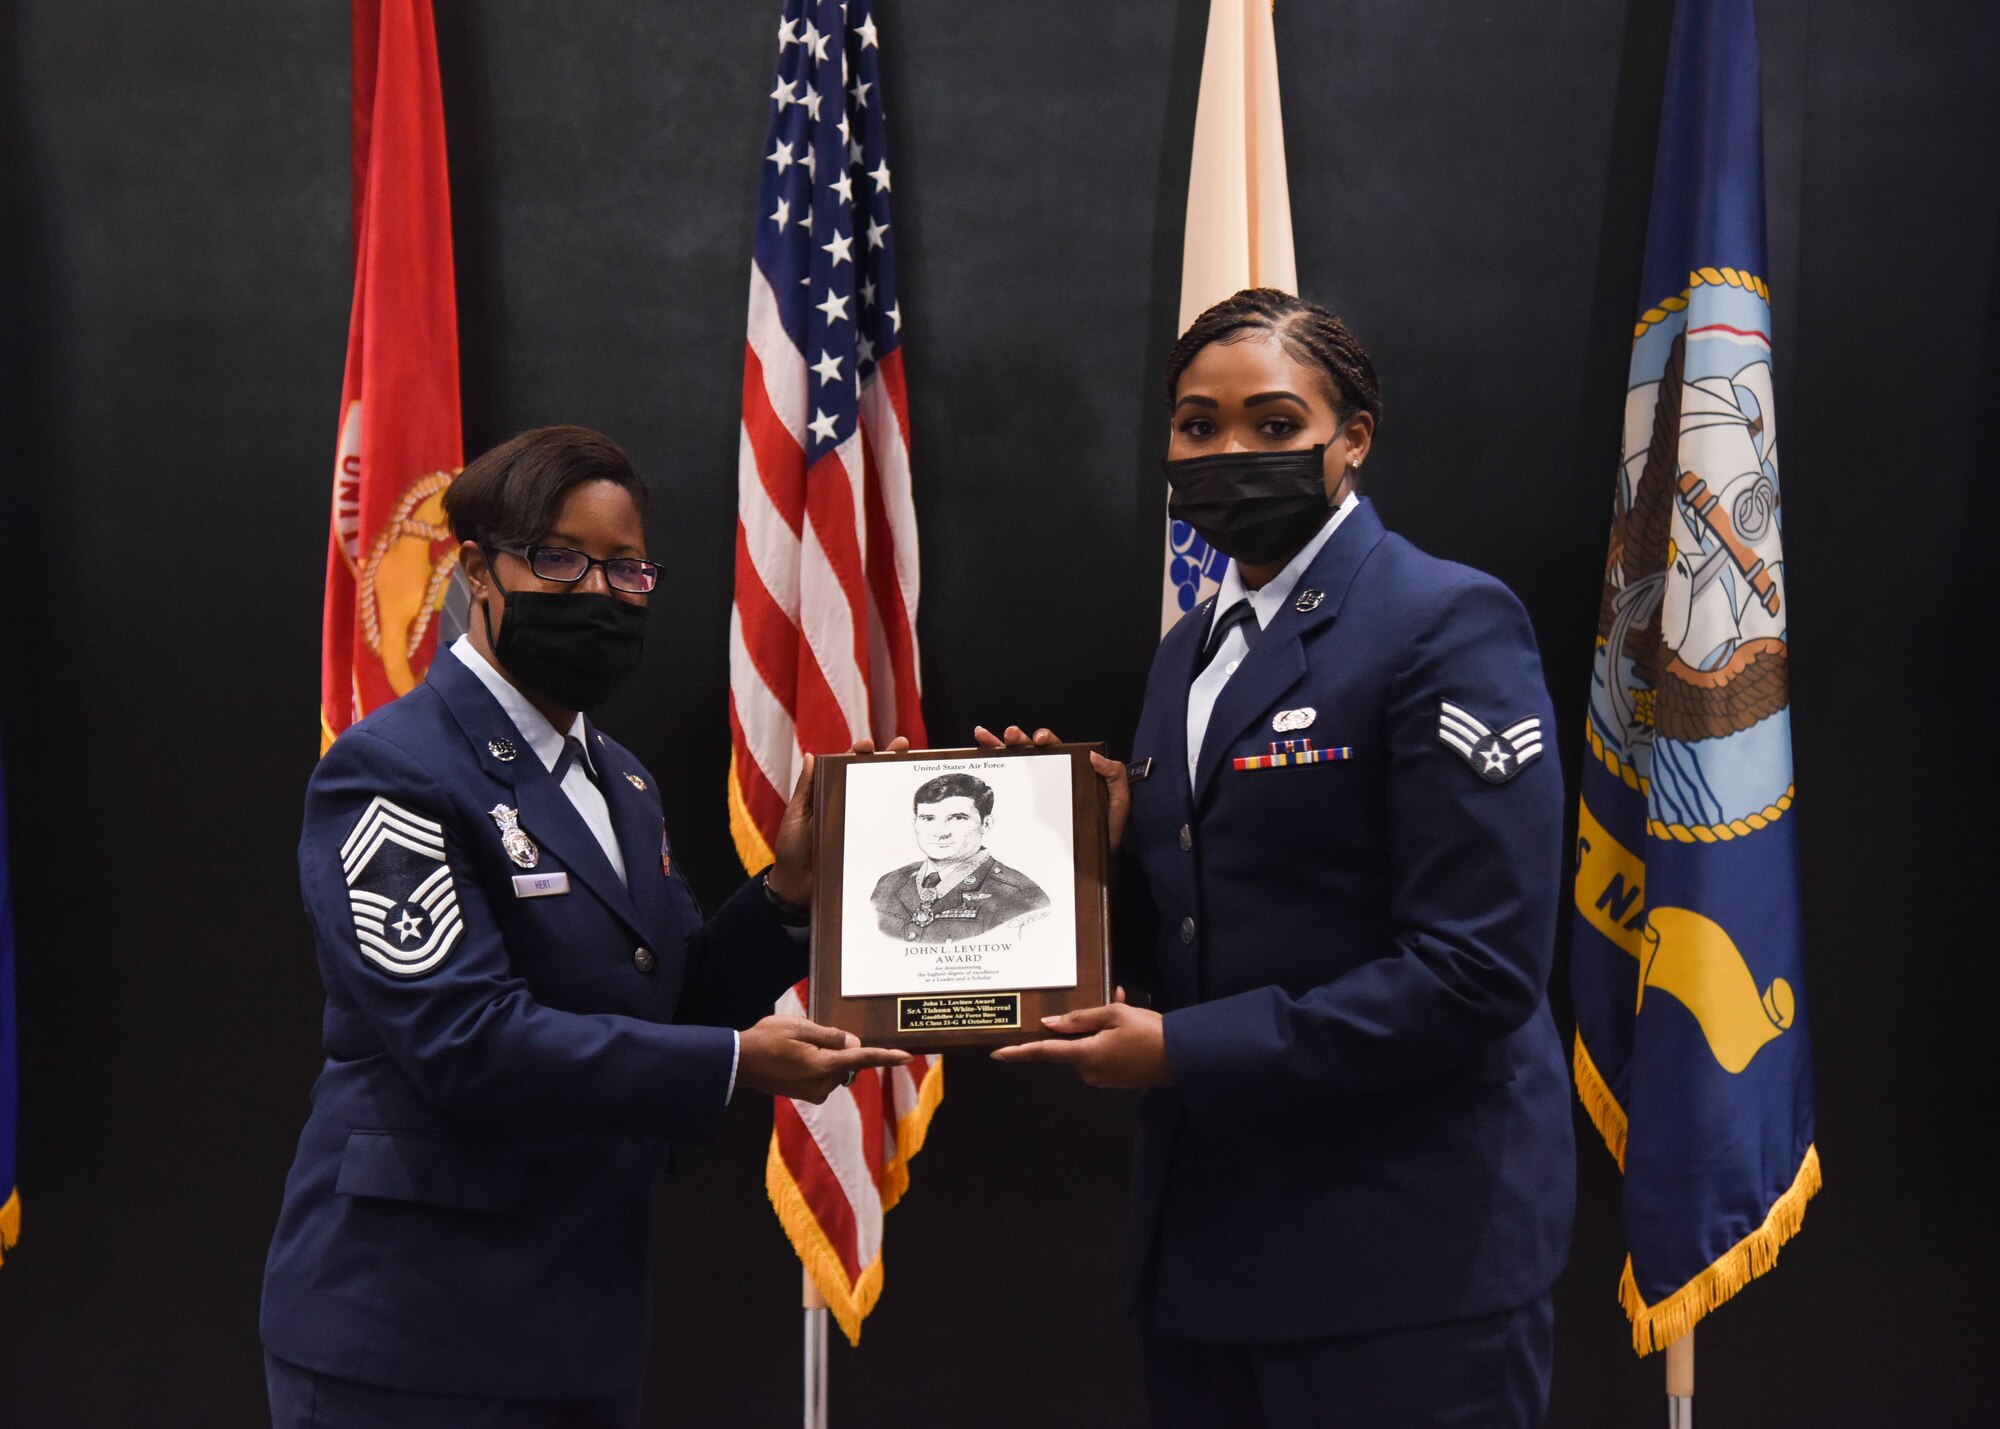 U.S. Air Force Chief Master Sgt. Chasity Hert, 17th Security Forces Squadron manager, presents Senior Airman Tishona White-Villarreal, 17th Communications Squadron knowledge operations manager the John L. Levitow award during The Airman Leadership School graduation ceremony on Goodfellow Air Force Base, Texas, Oct. 8, 2021. The John L. Levitow award is the highest award in professional military education and presented to the student who demonstrates the most outstanding leadership and scholastic achievement. (U.S. Air Force photo by Staff Sgt. Tyrell Hall)